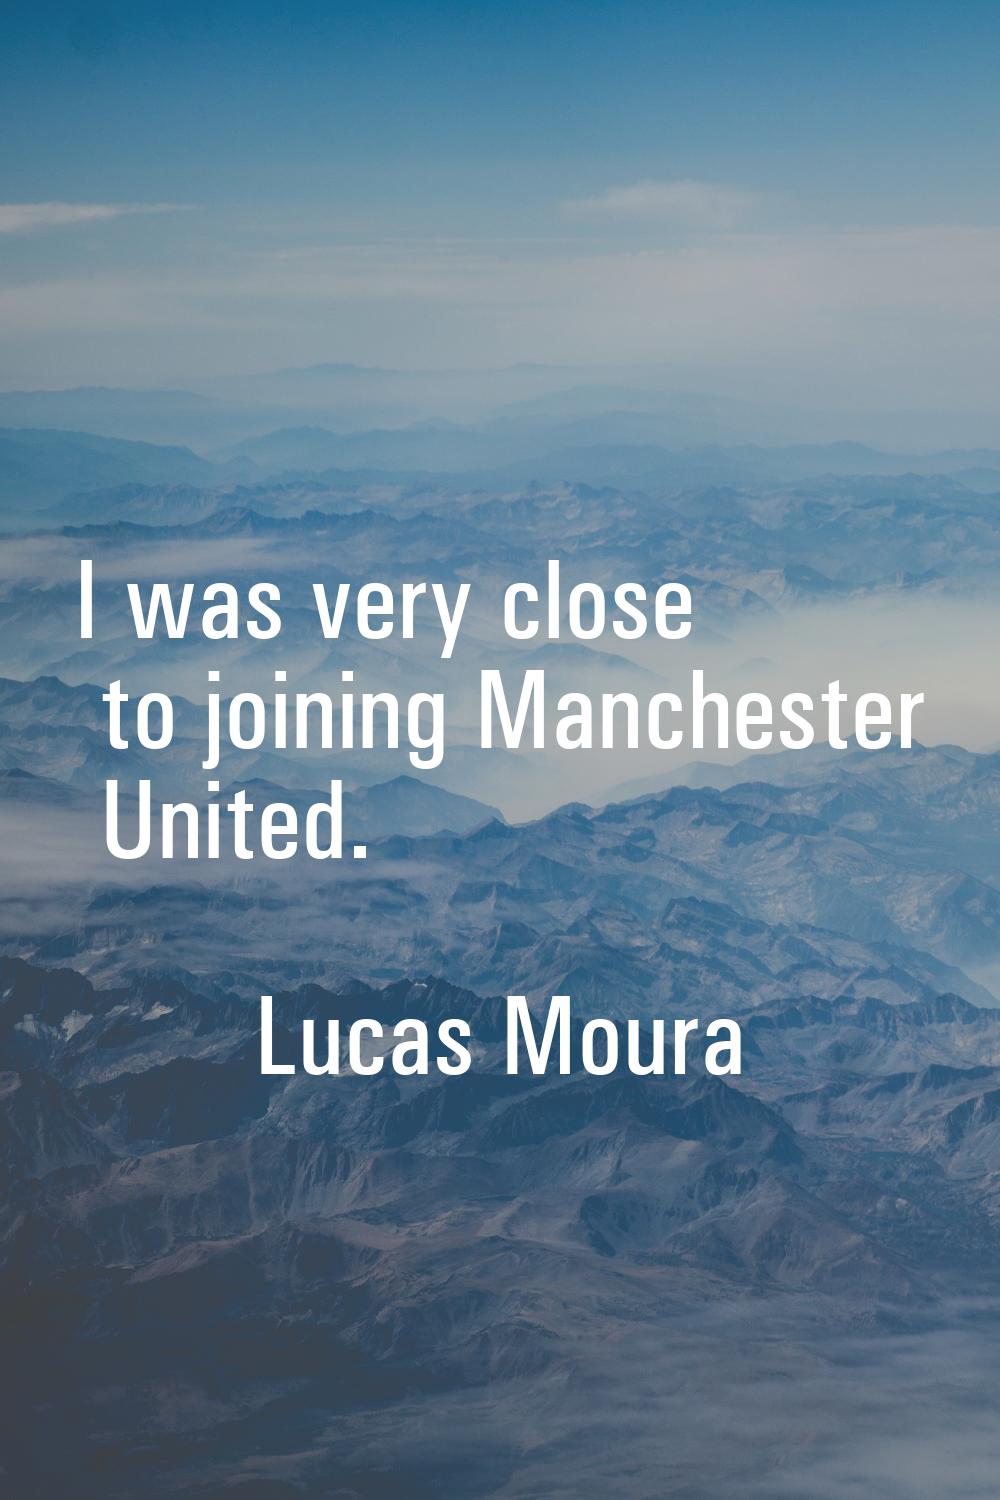 I was very close to joining Manchester United.